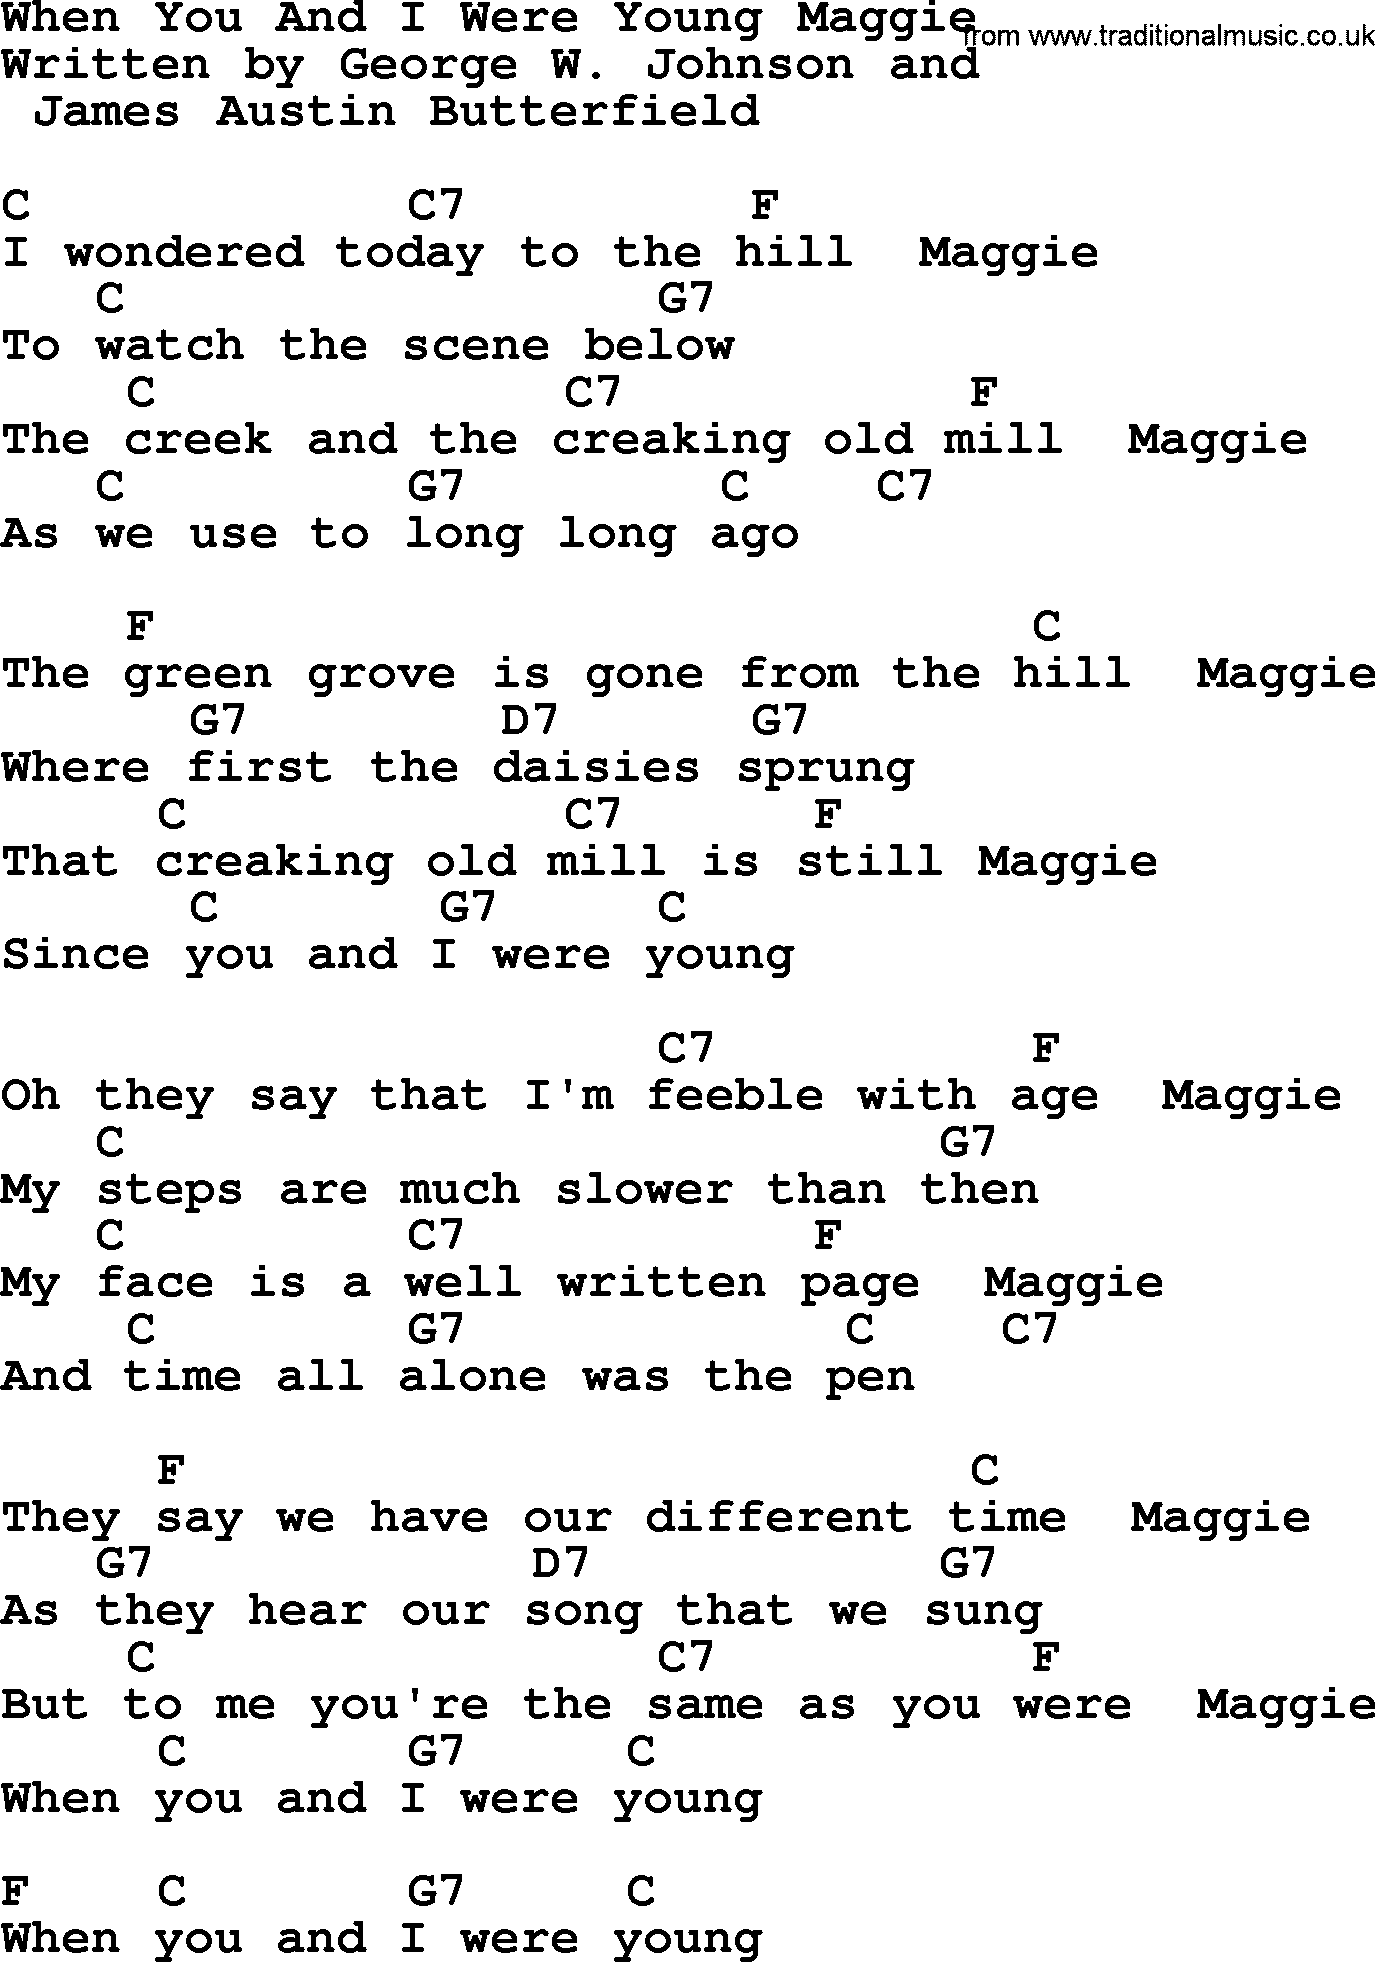 Top 1000 Most Popular Folk and Old-time Songs: When You And I Were Young Maggie, lyrics and chords